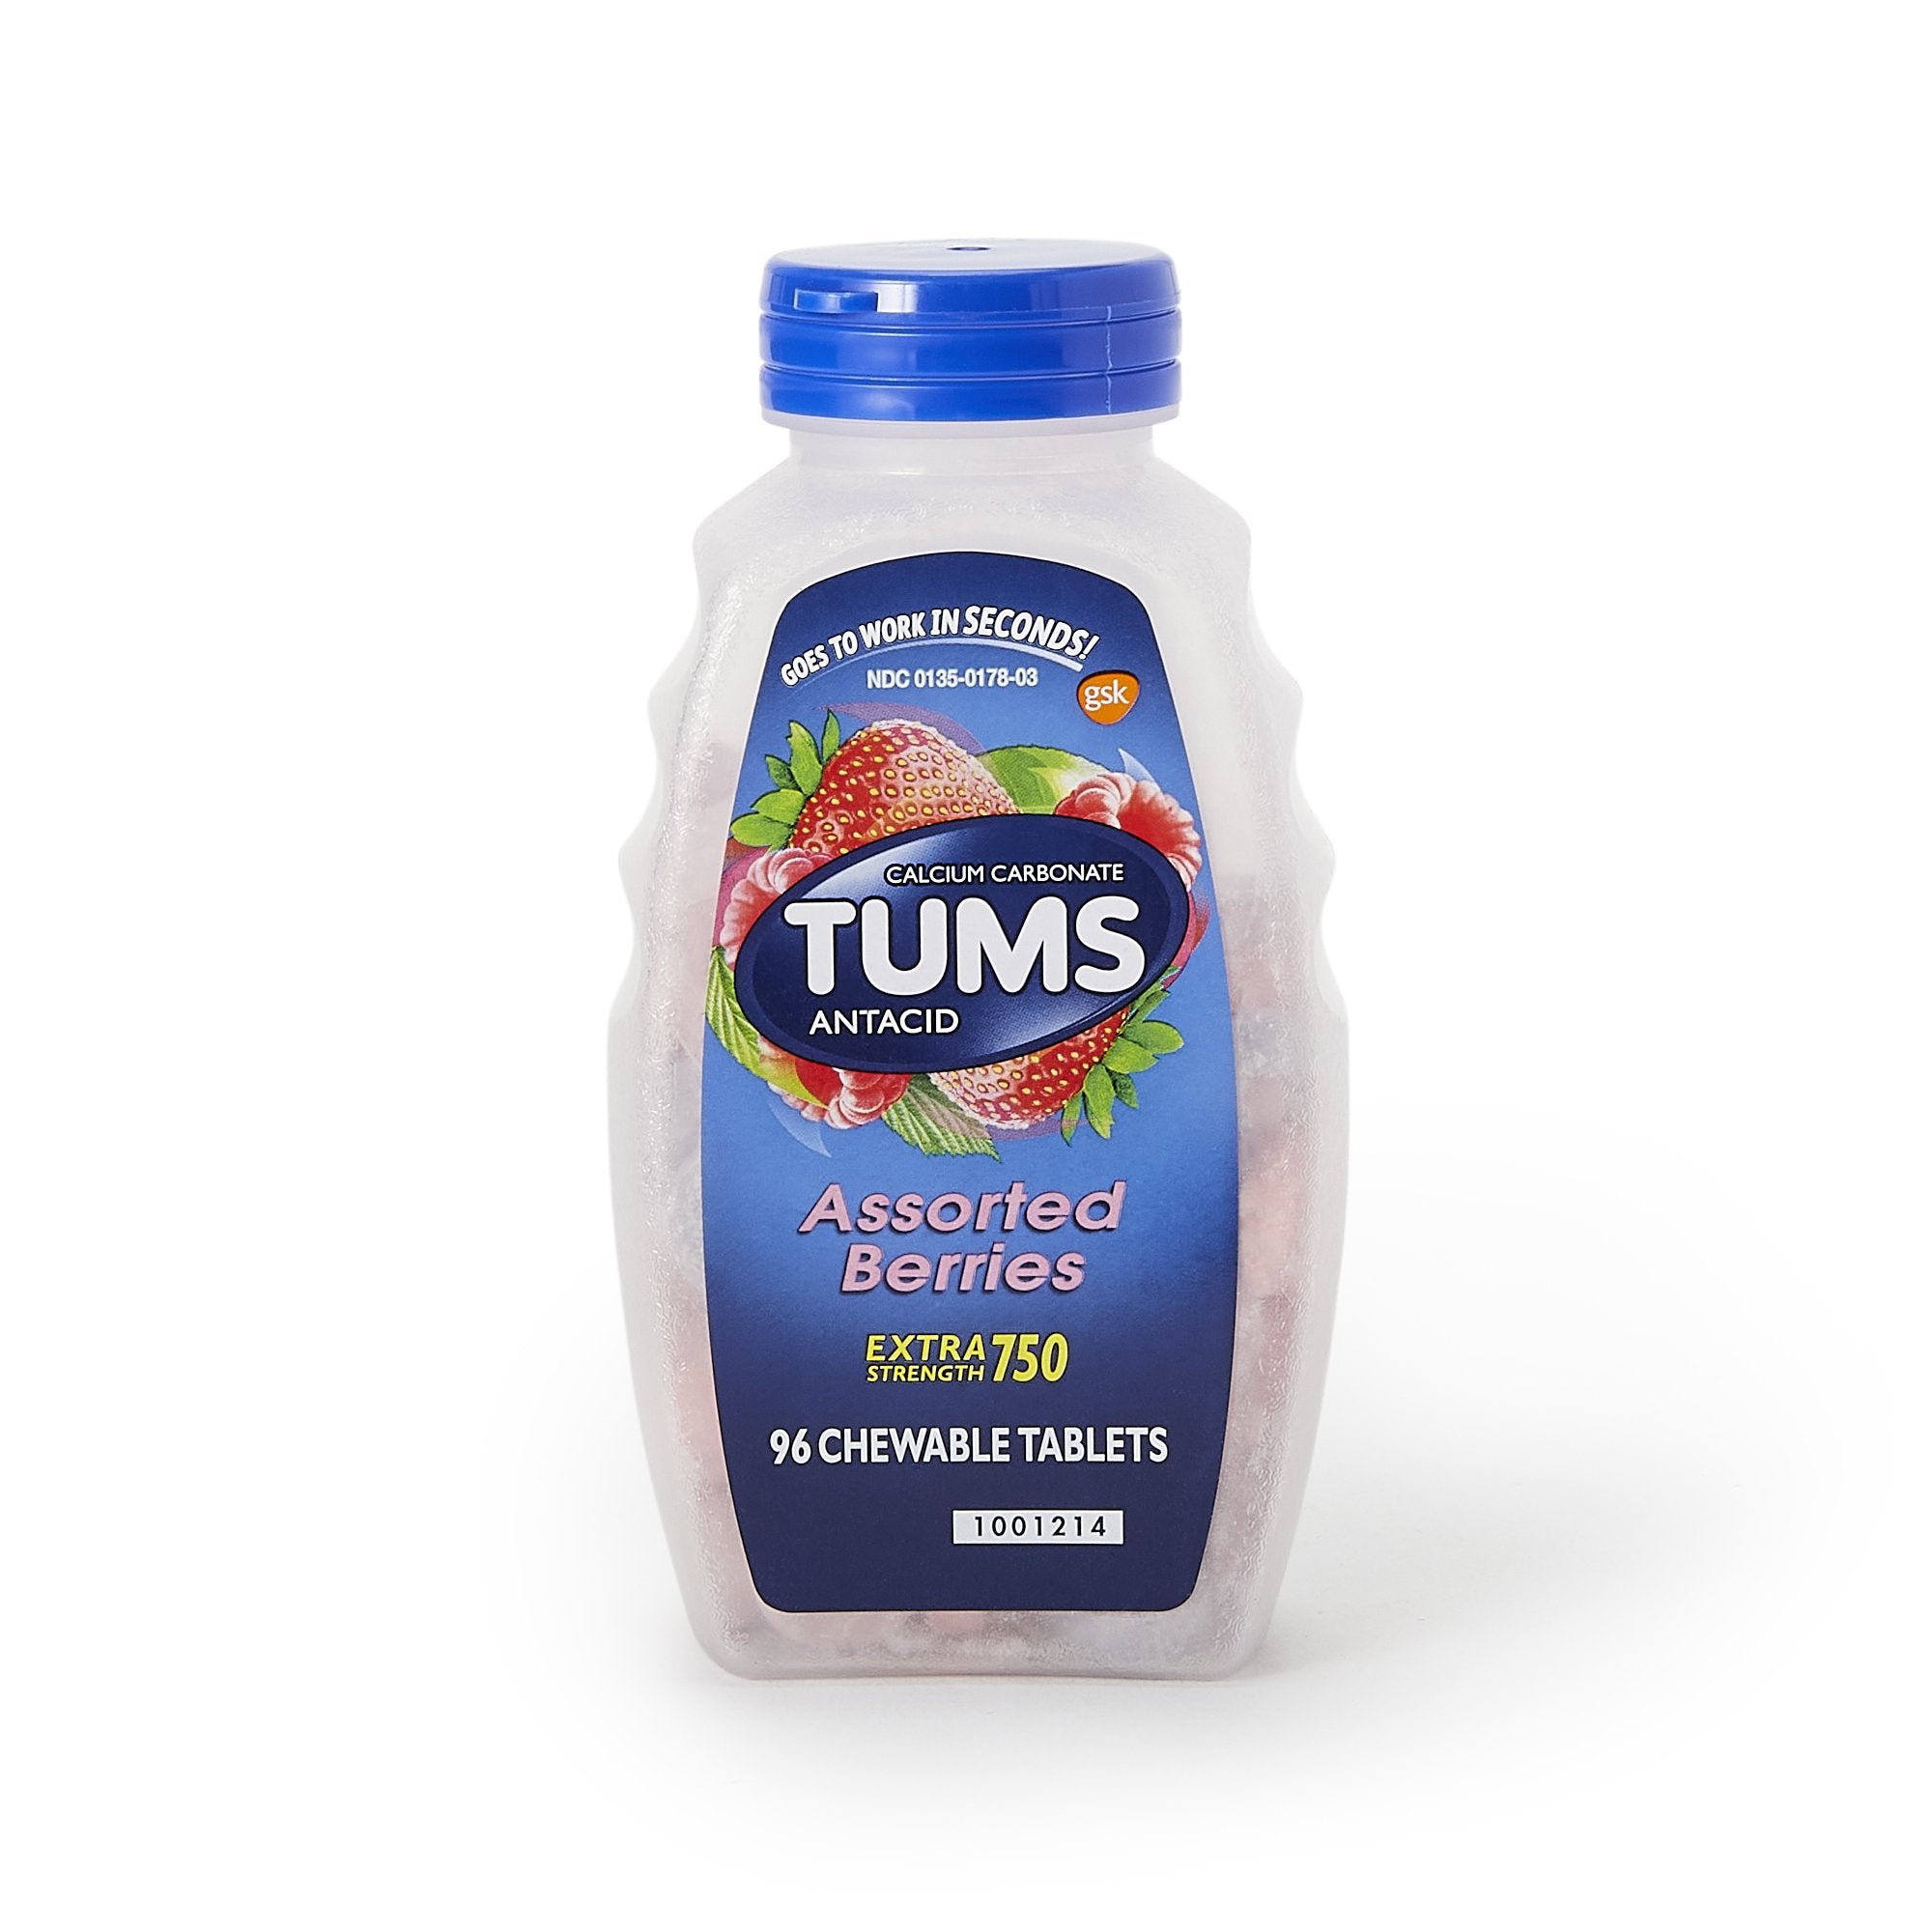 Antacid Tums Extra Strength 750 mg Strength Chewable Tablet 96 per Bottle